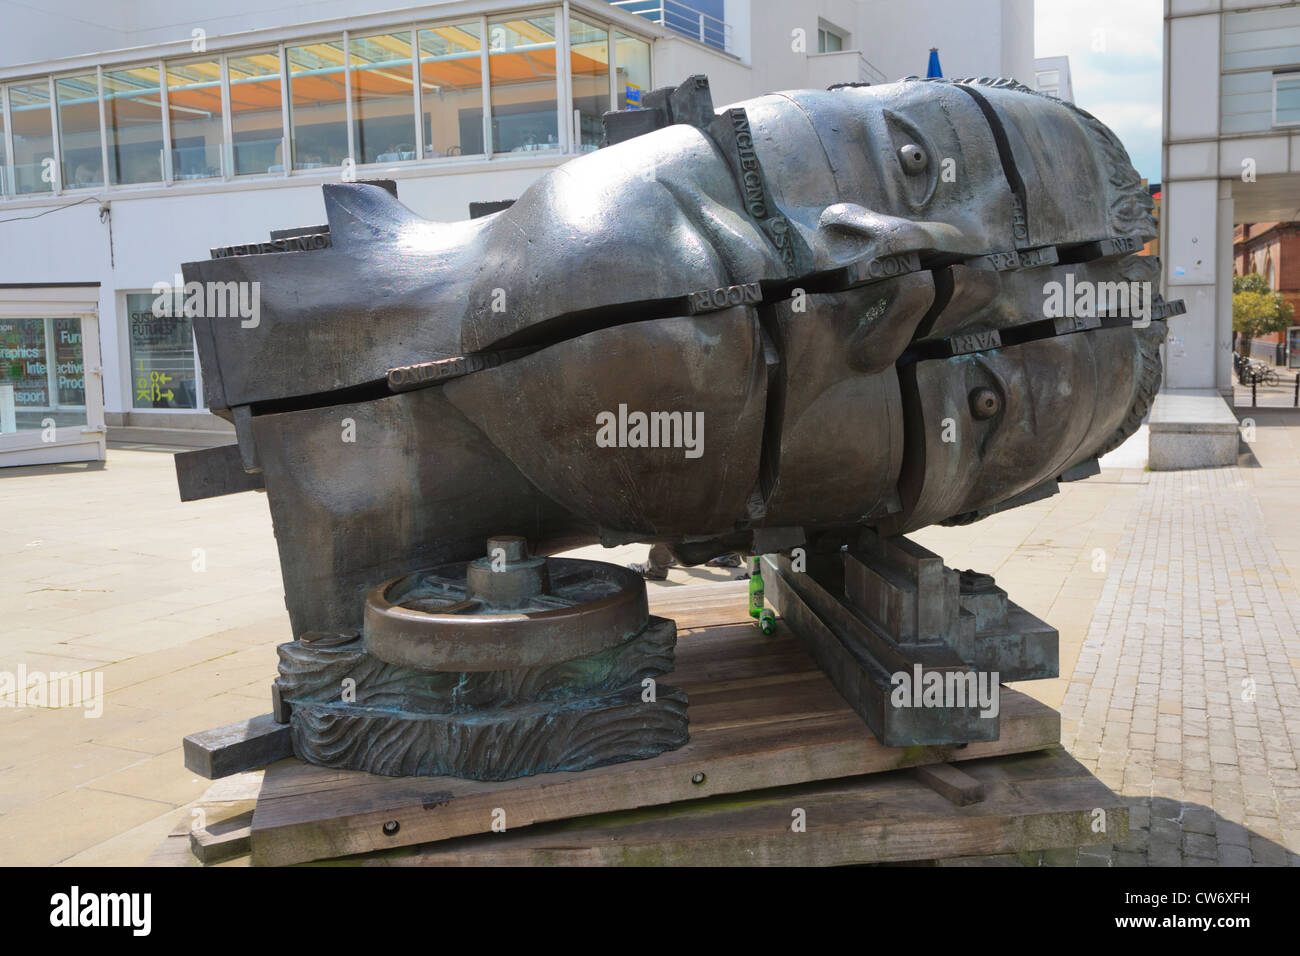 Eduardo Paolozzi's sculpture 'Head of Invention' at Butler's Wharf London Stock Photo